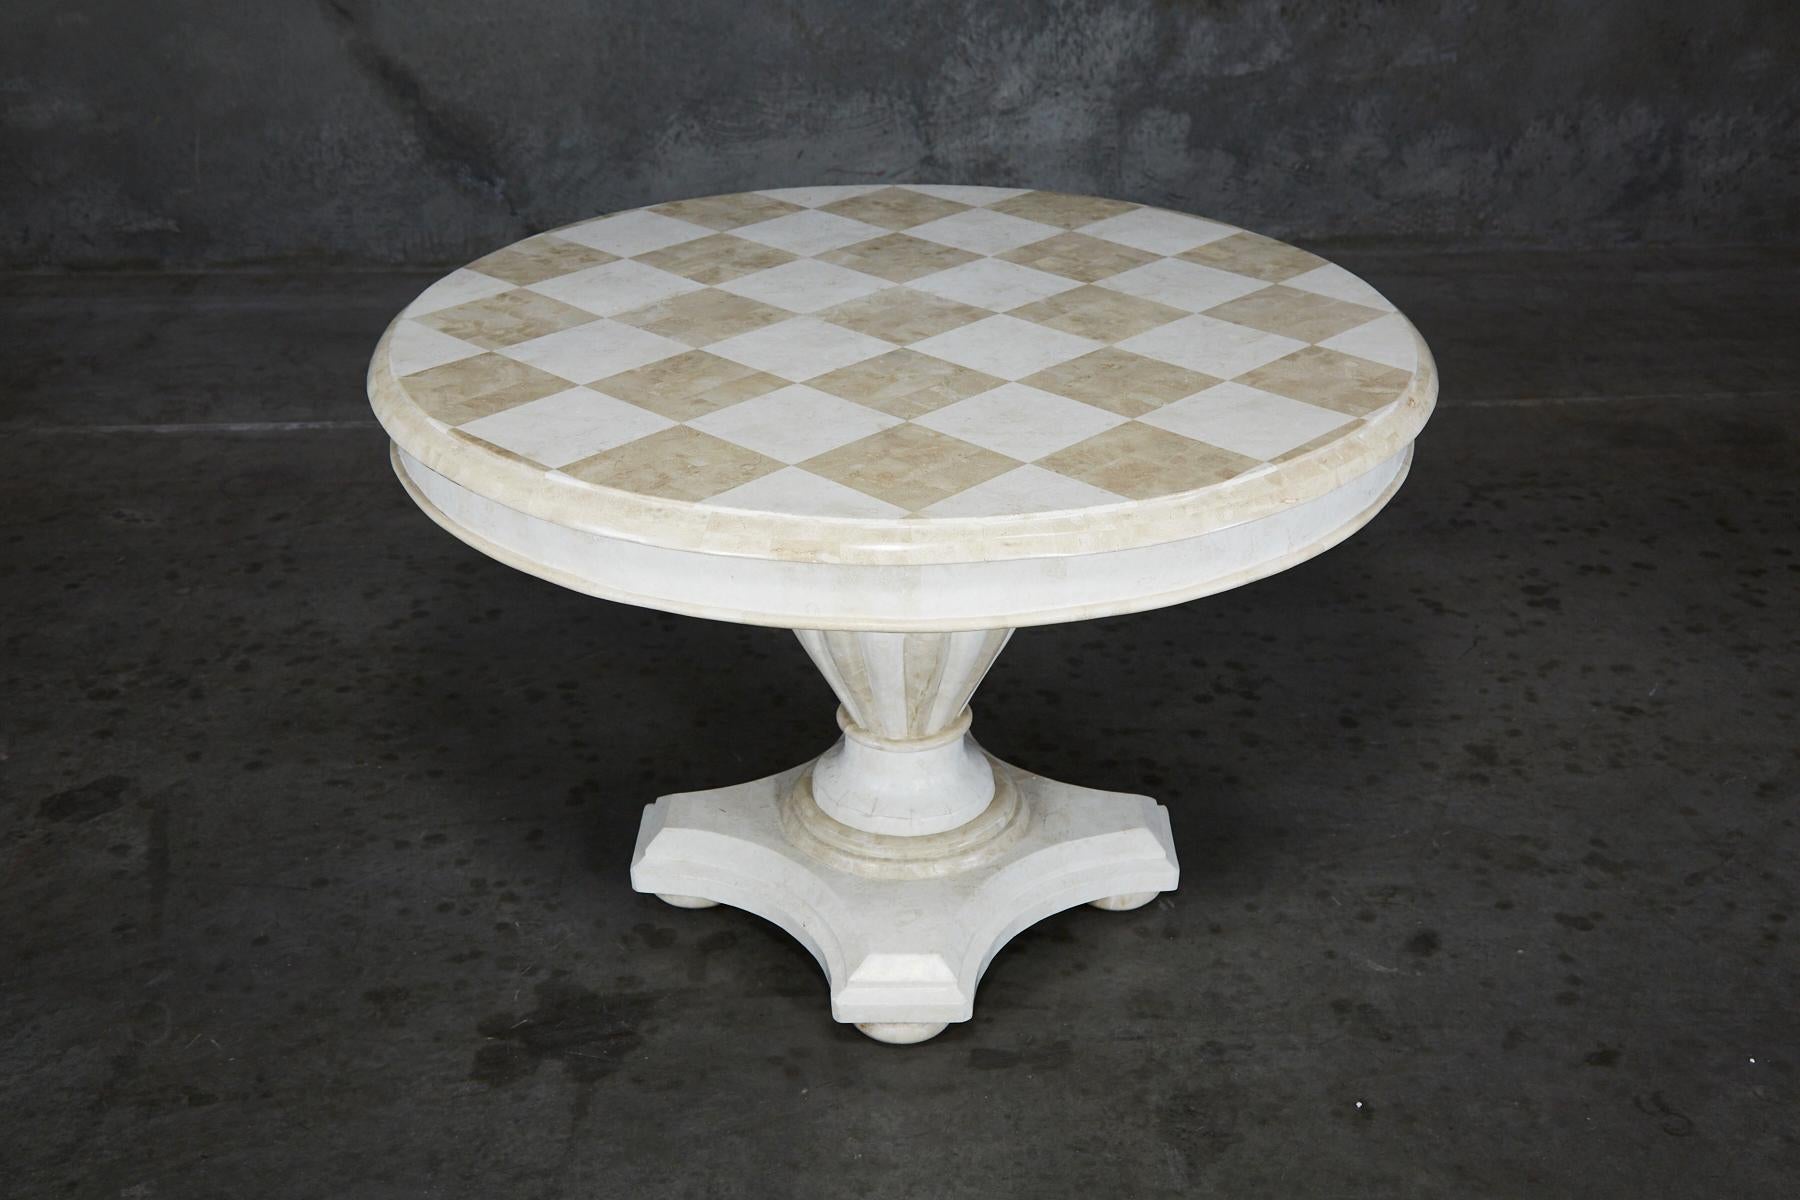 Post-Modern Round Pedestal Base Tessellated Stone Dining Table with Checkered Top, 1990s For Sale